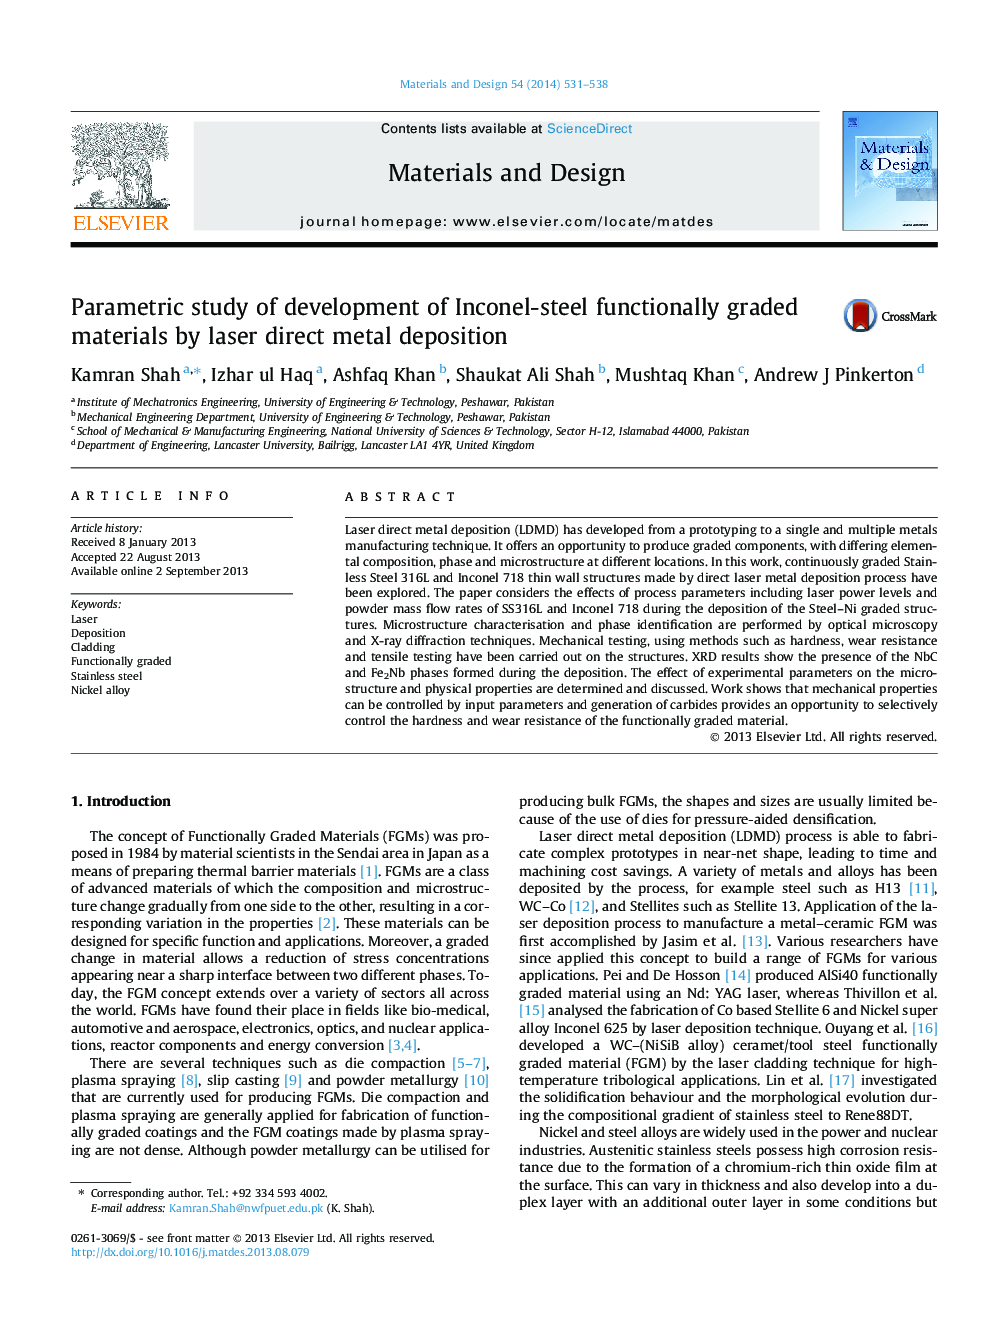 Parametric study of development of Inconel-steel functionally graded materials by laser direct metal deposition